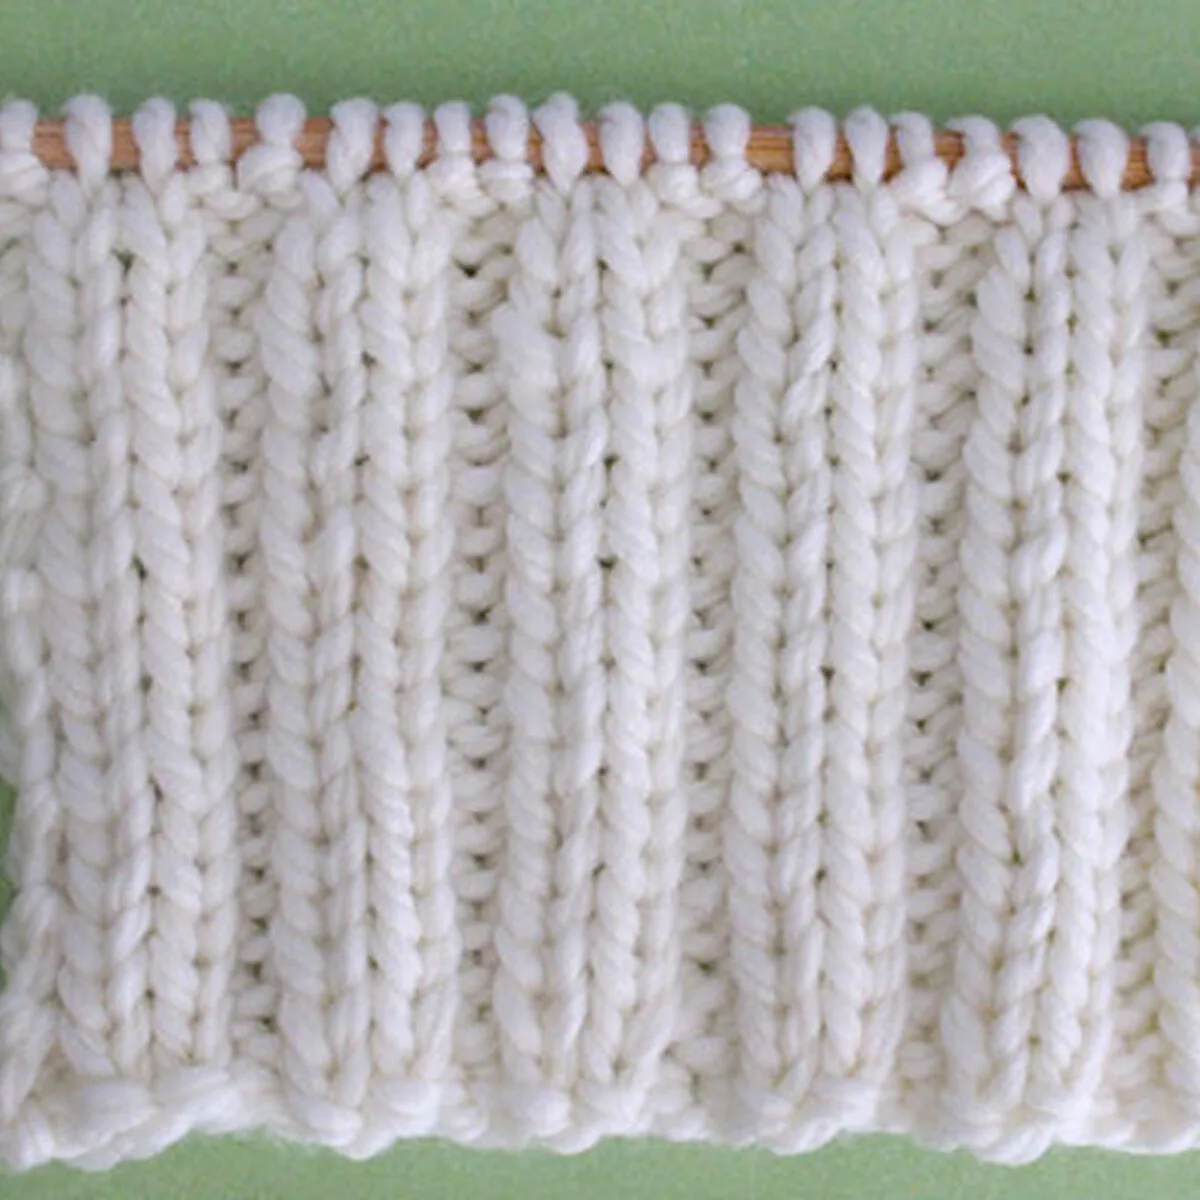 How To Knit Rib Stitch Patterns (1x1 and 2x2 ribbing)  Rib stitch  knitting, Knitting basics, Knit stitches for beginners